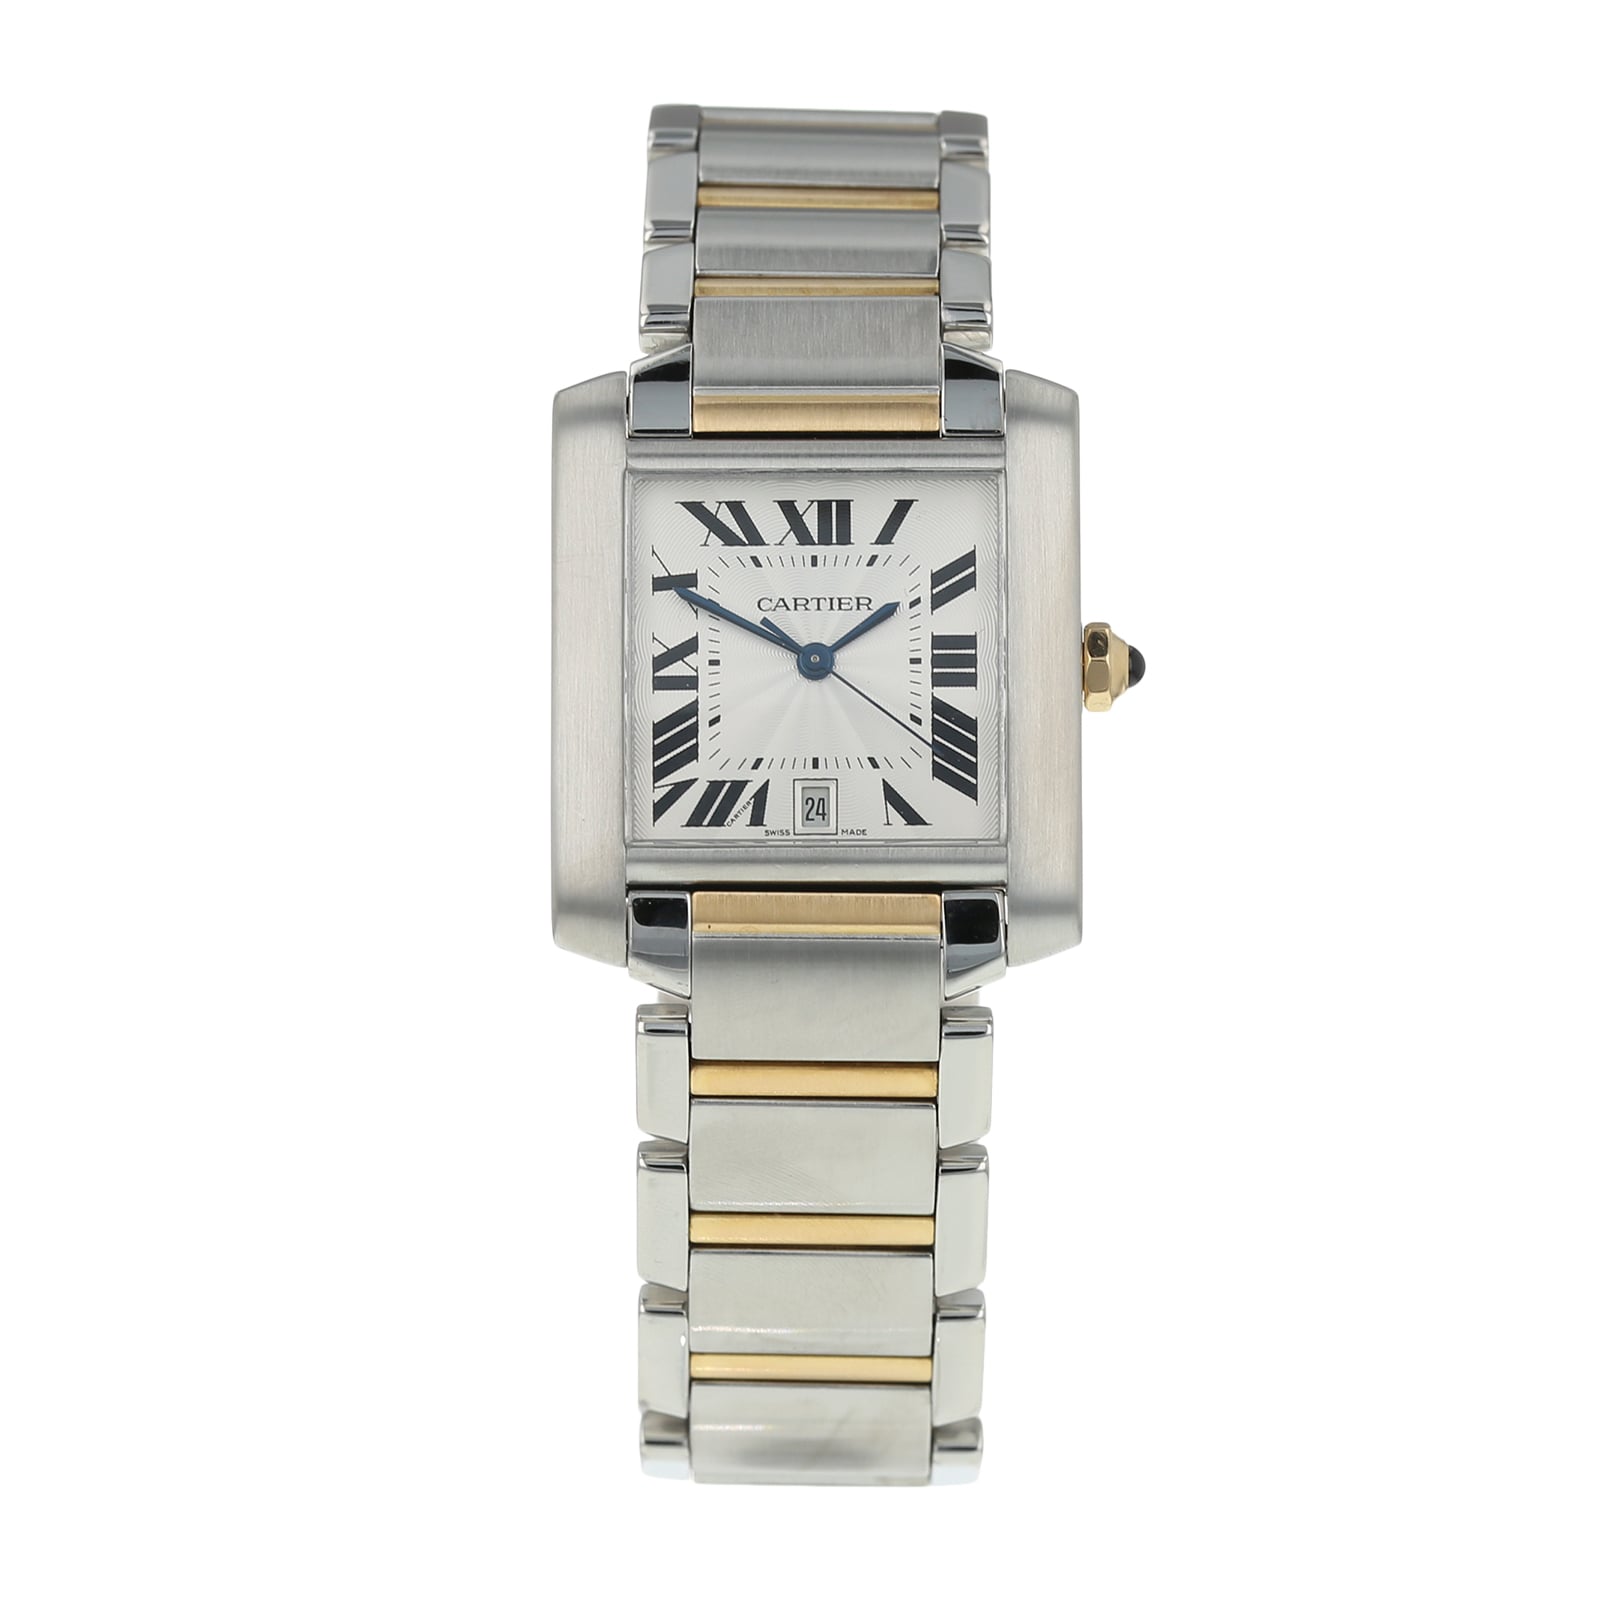 pre owned mens cartier tank watch